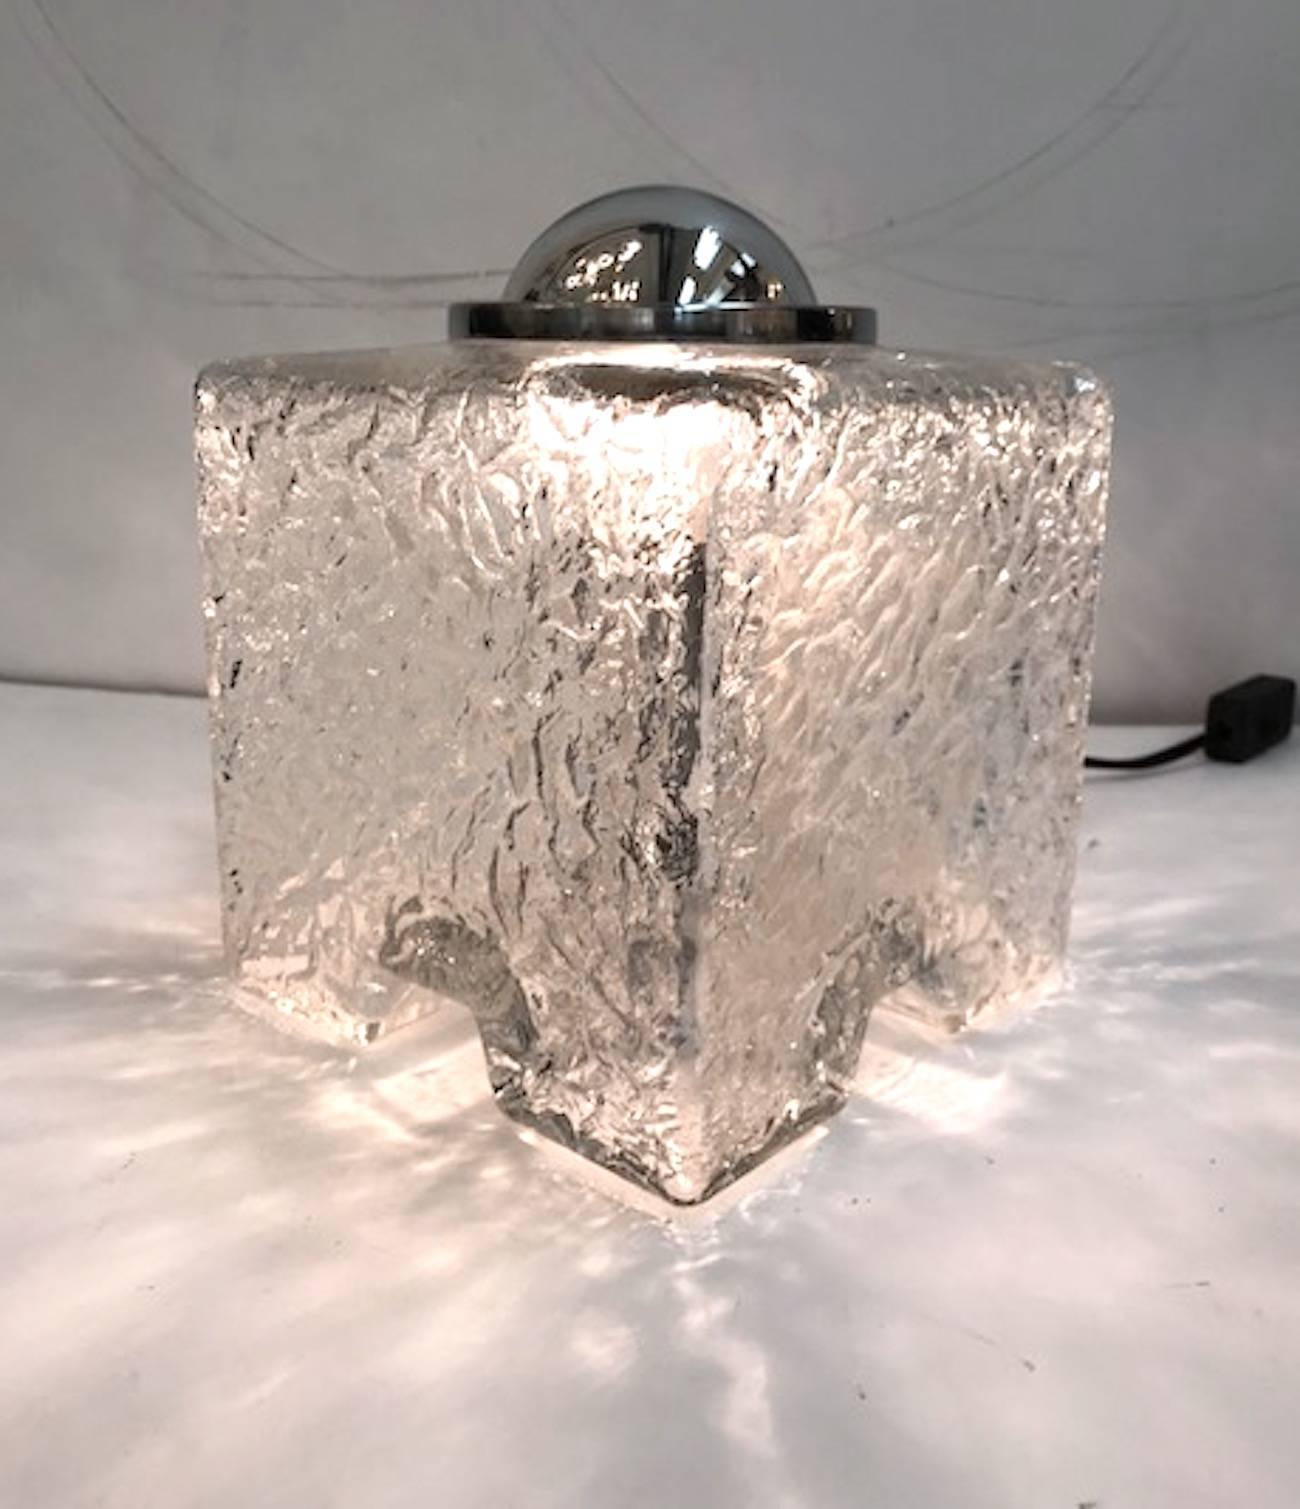 Pure Italian 1970s design is this pair of table lamps. Designed by well know Italian lighting designer Tony Zuccheri for VeArt of Milano. Each is made of textured or mottled glass blown glass cube shades. Each has a chrome base mount and matching